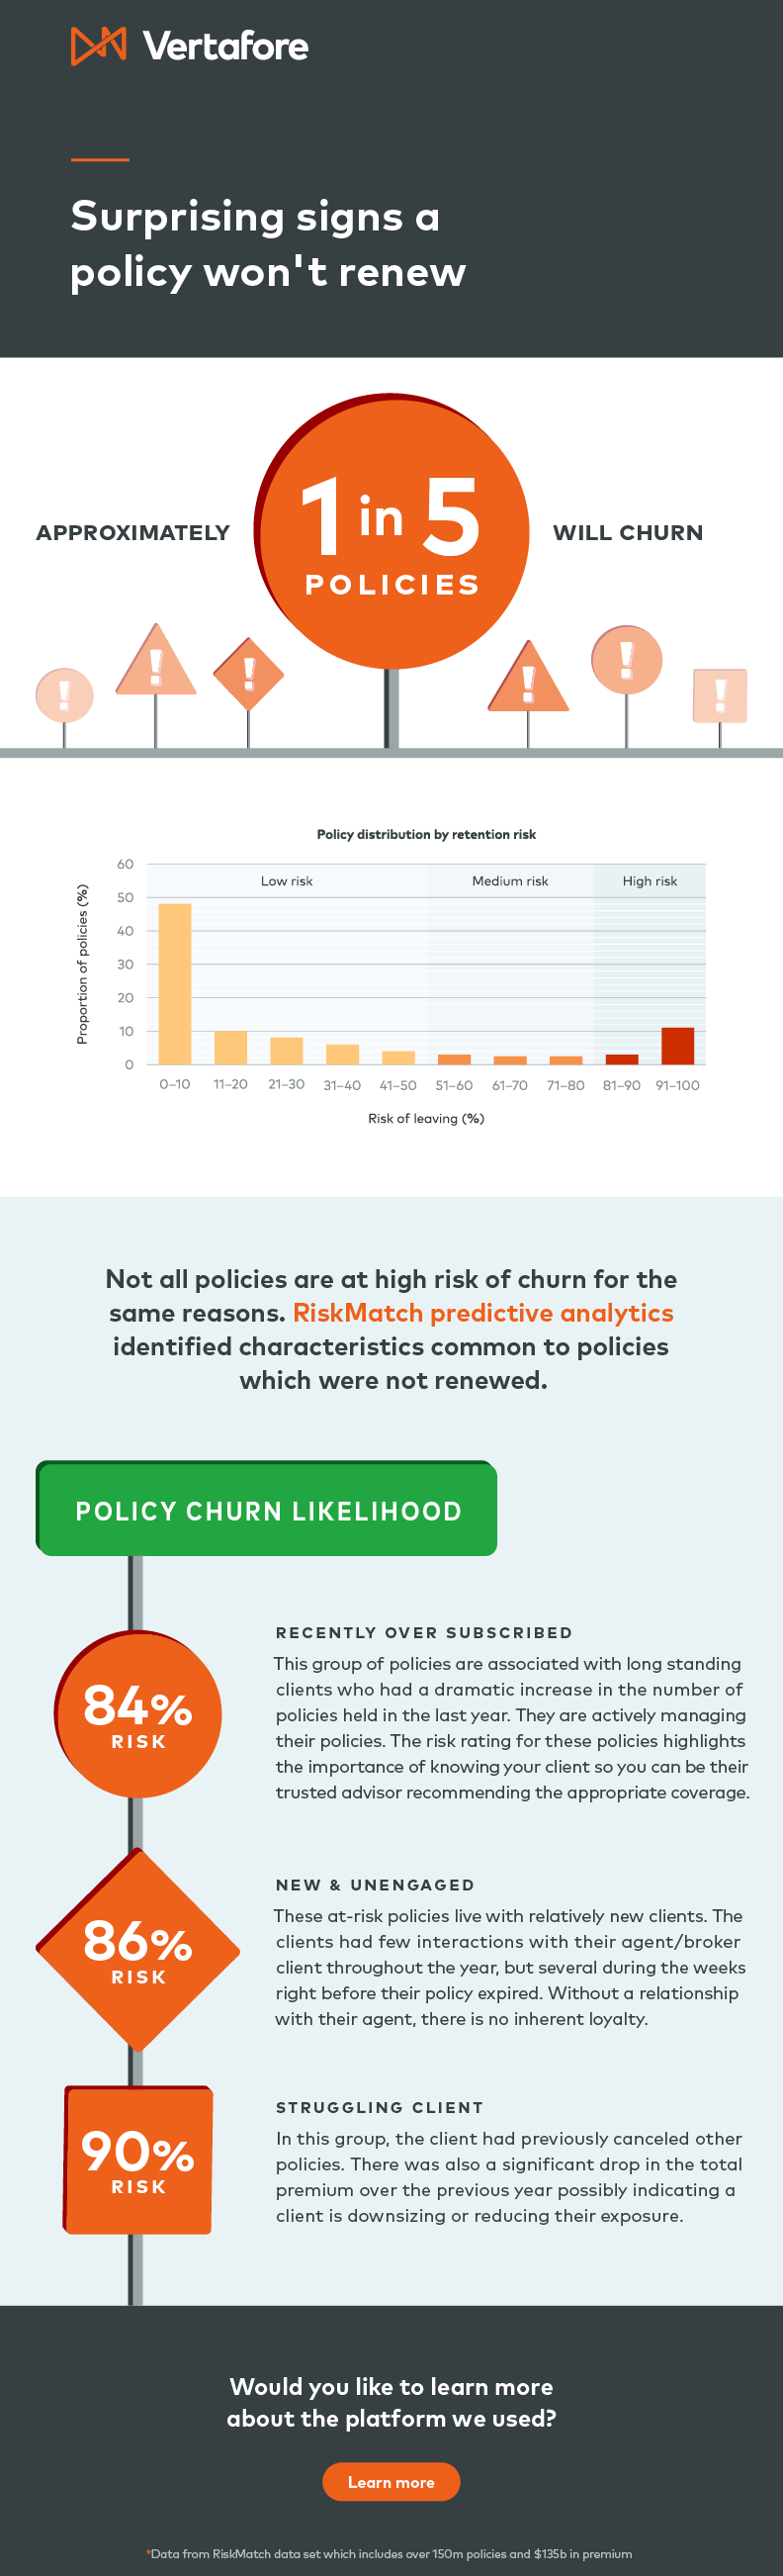 Surprising signs a policy won't renew - RiskMatch infographic